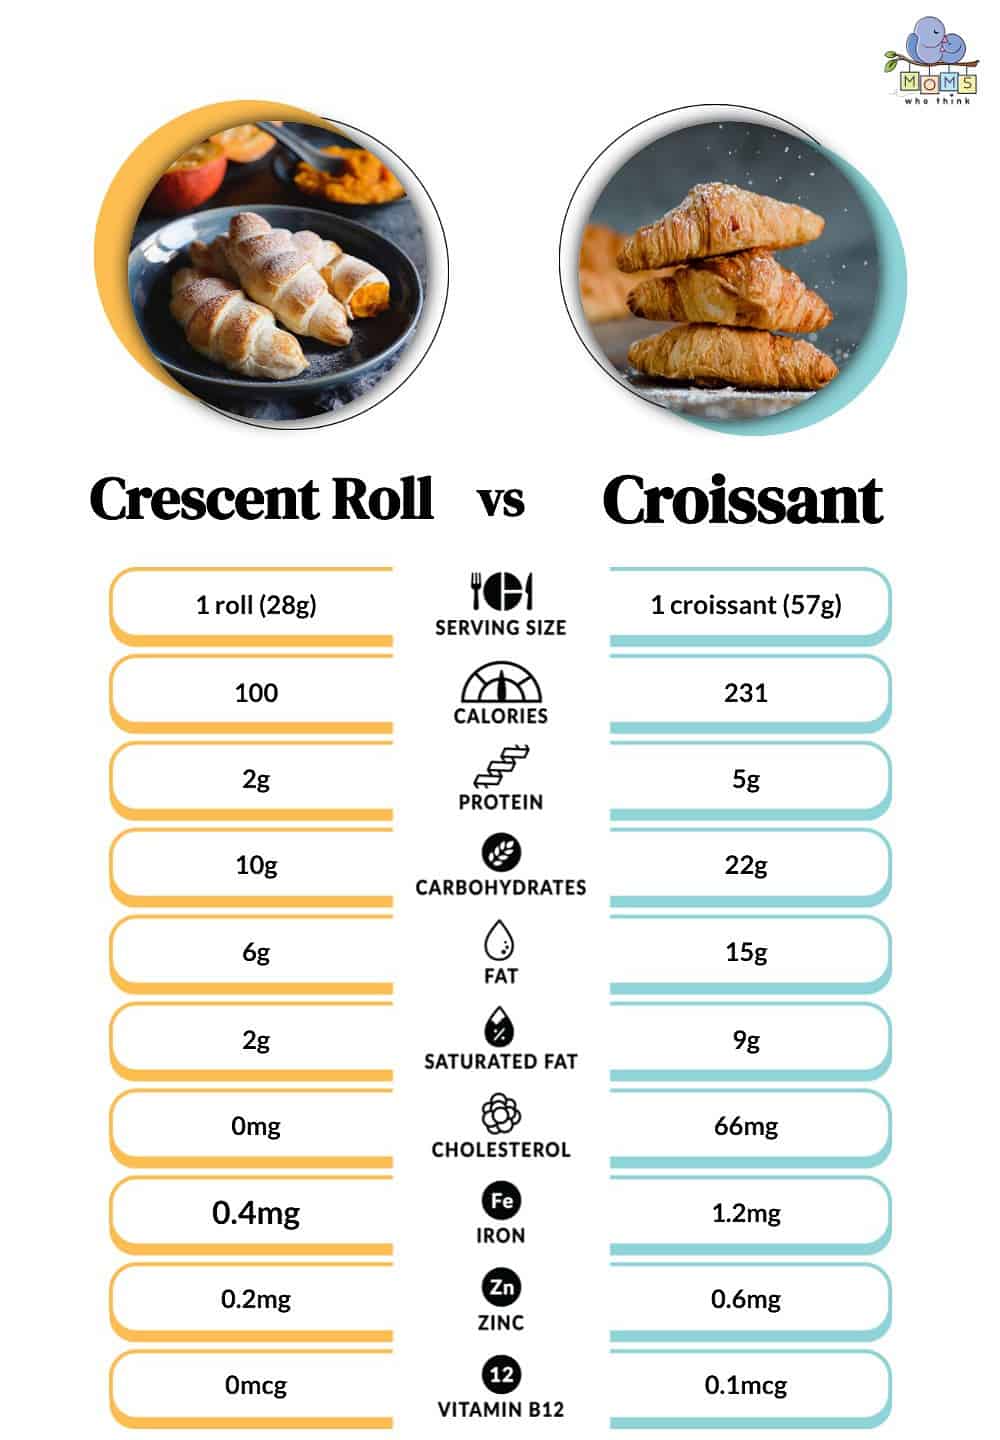 Crescent Roll vs Croissant Nutritional Facts